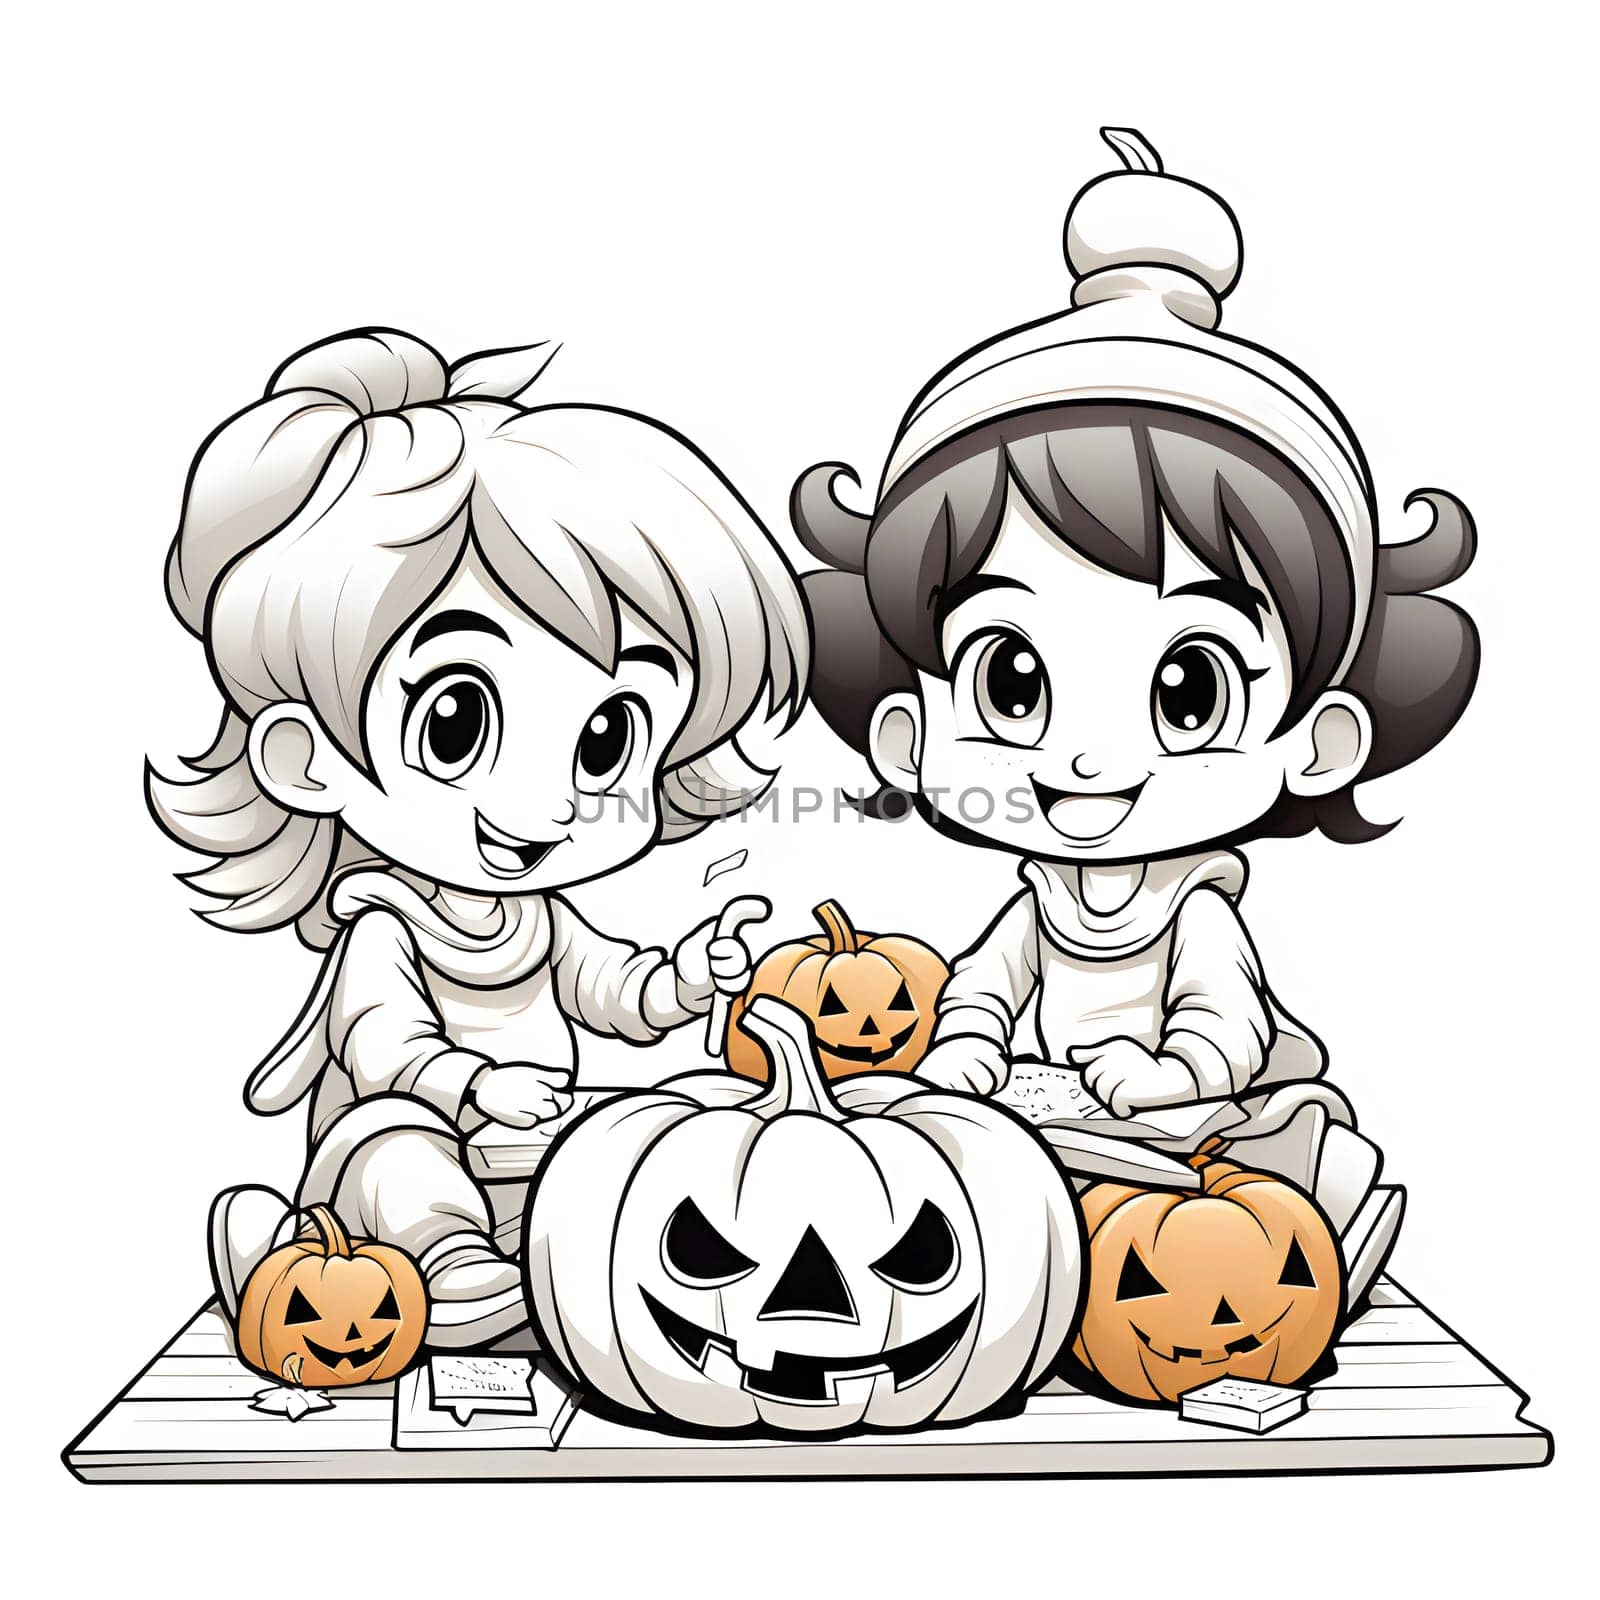 Two children with jack-o-lantern pumpkins, Halloween black and white picture coloring book. Atmosphere of darkness and fear.